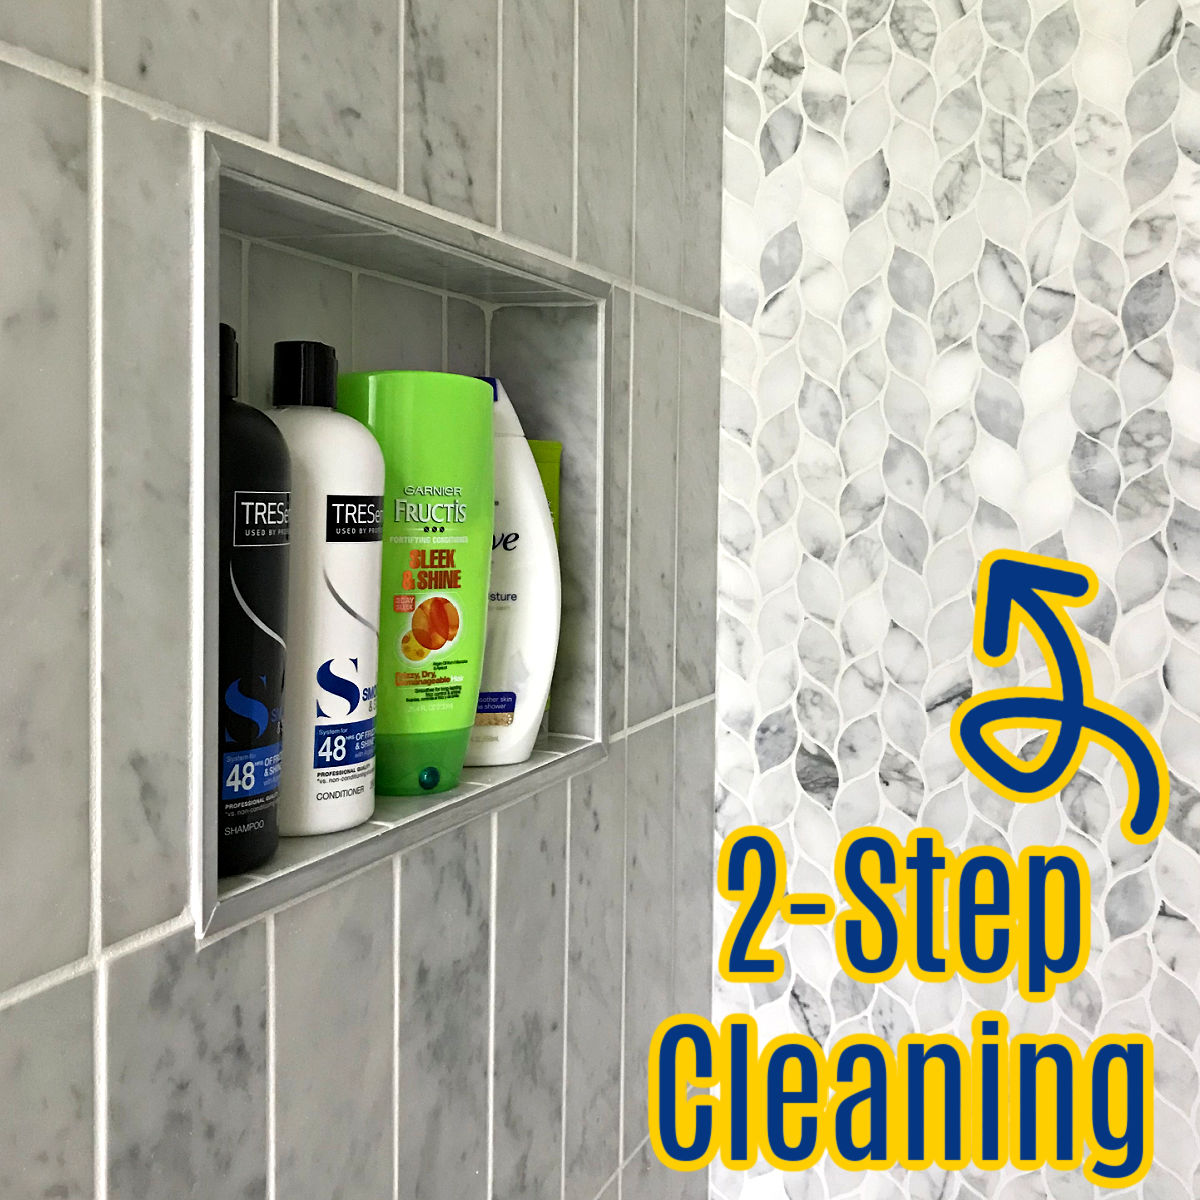 Clean old dirty bathroom floors and walls, bathroom cleaning tools to try  and remove dirt, mold and corrosion from white bathroom tiles. Stock Photo